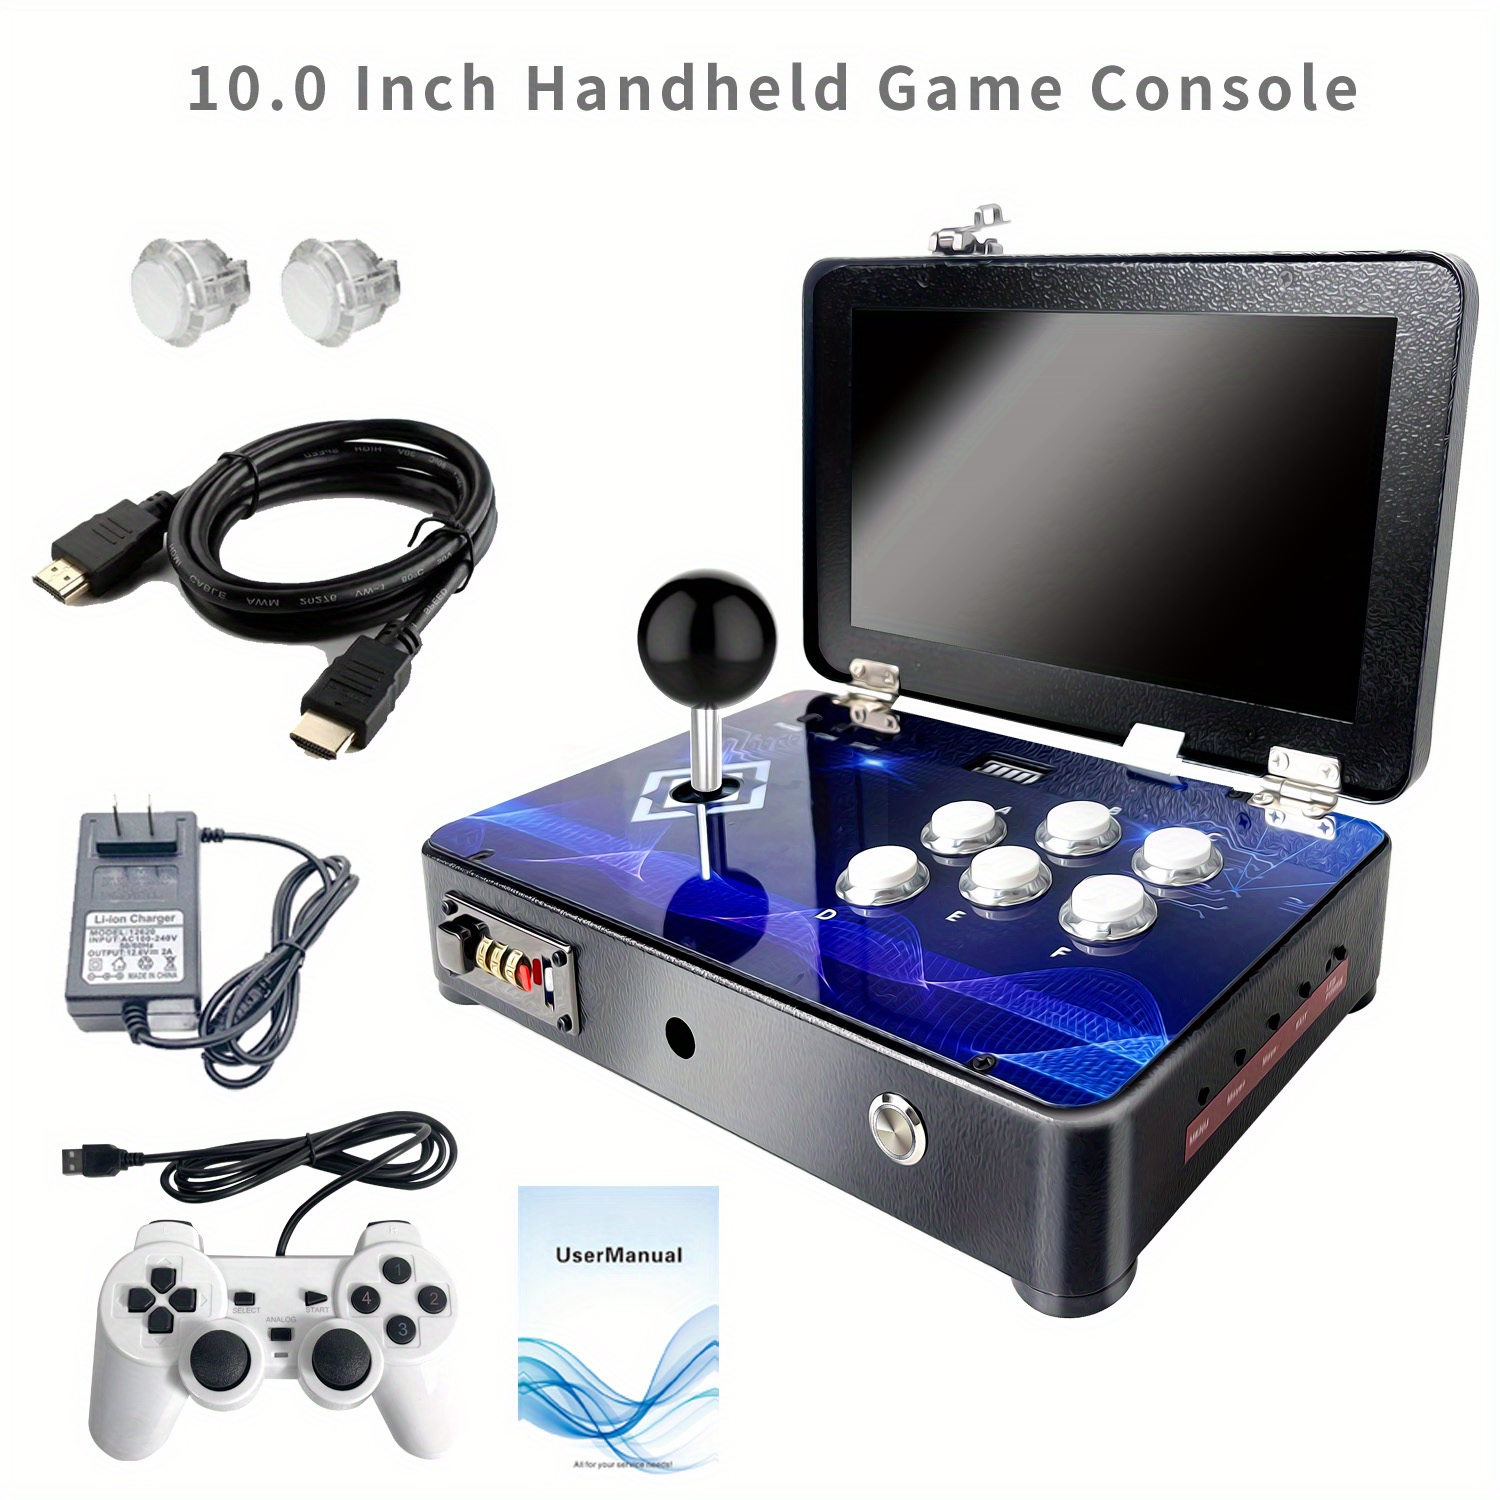  【20000 Games in 1】 Download Function 3D Pandora's Box, 3D  Arcade Game Console Support Download Add Extra Game, 3D Game, 1280x720 Full  HD, Search/ Save/Pause Game, 4 Players Online Game 